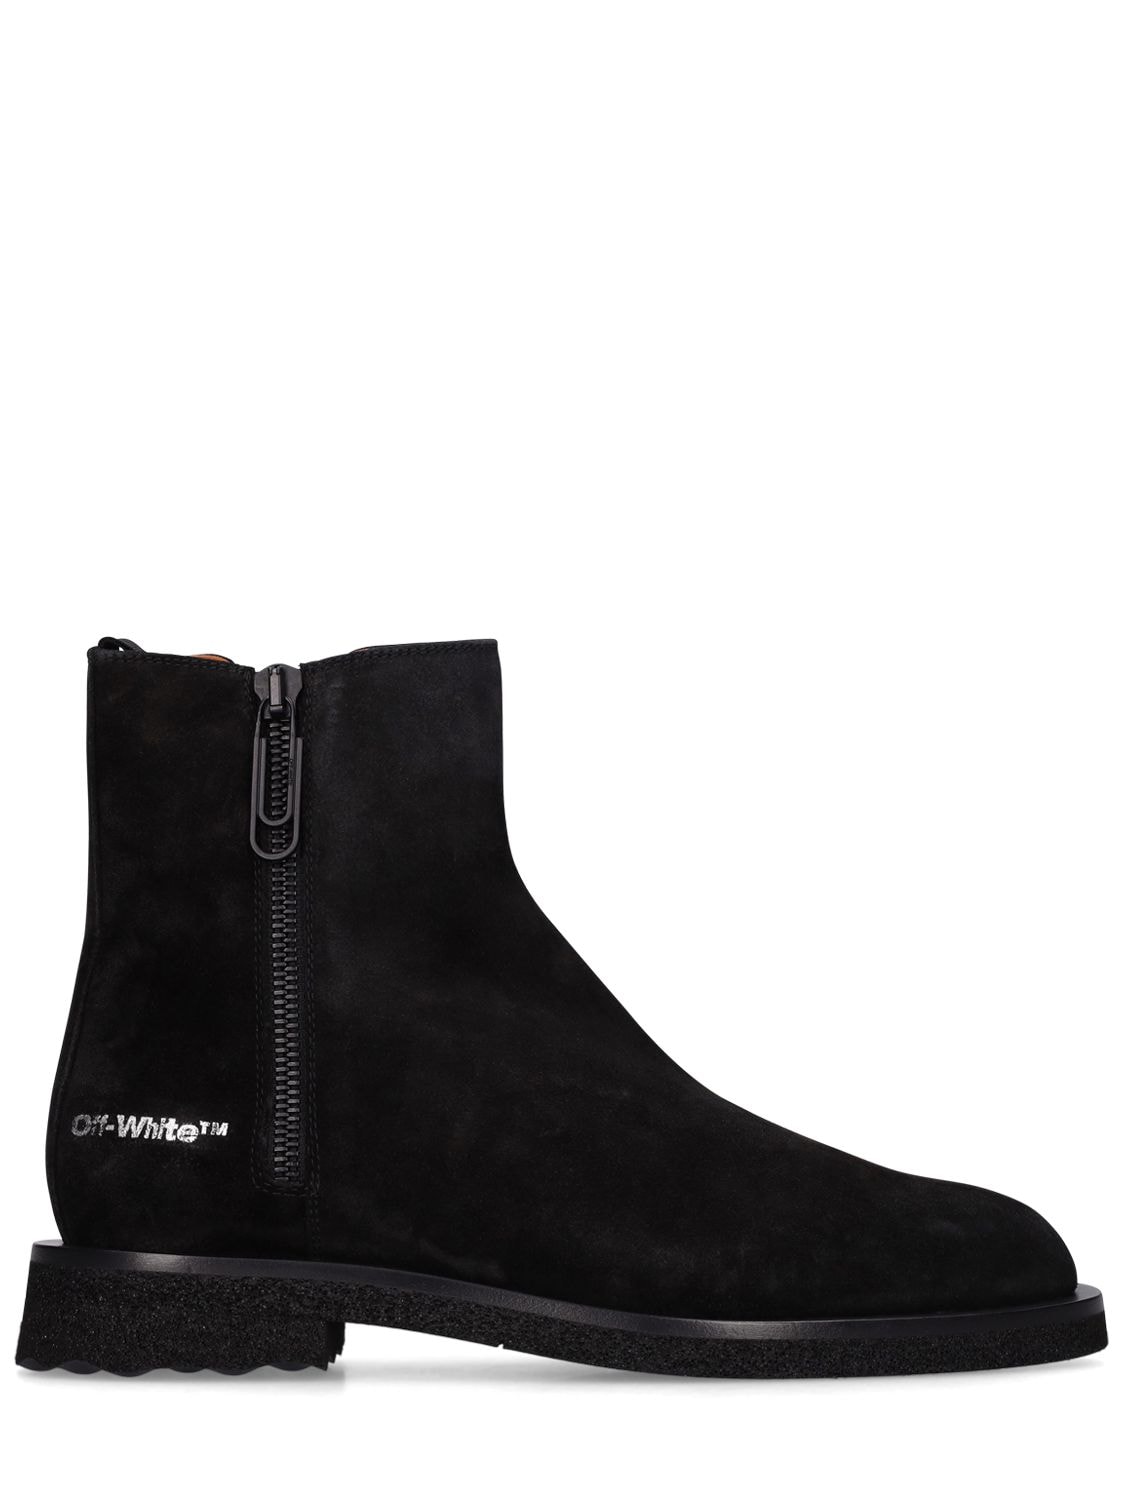 OFF-WHITE Suede Spongesole Ankle Boots